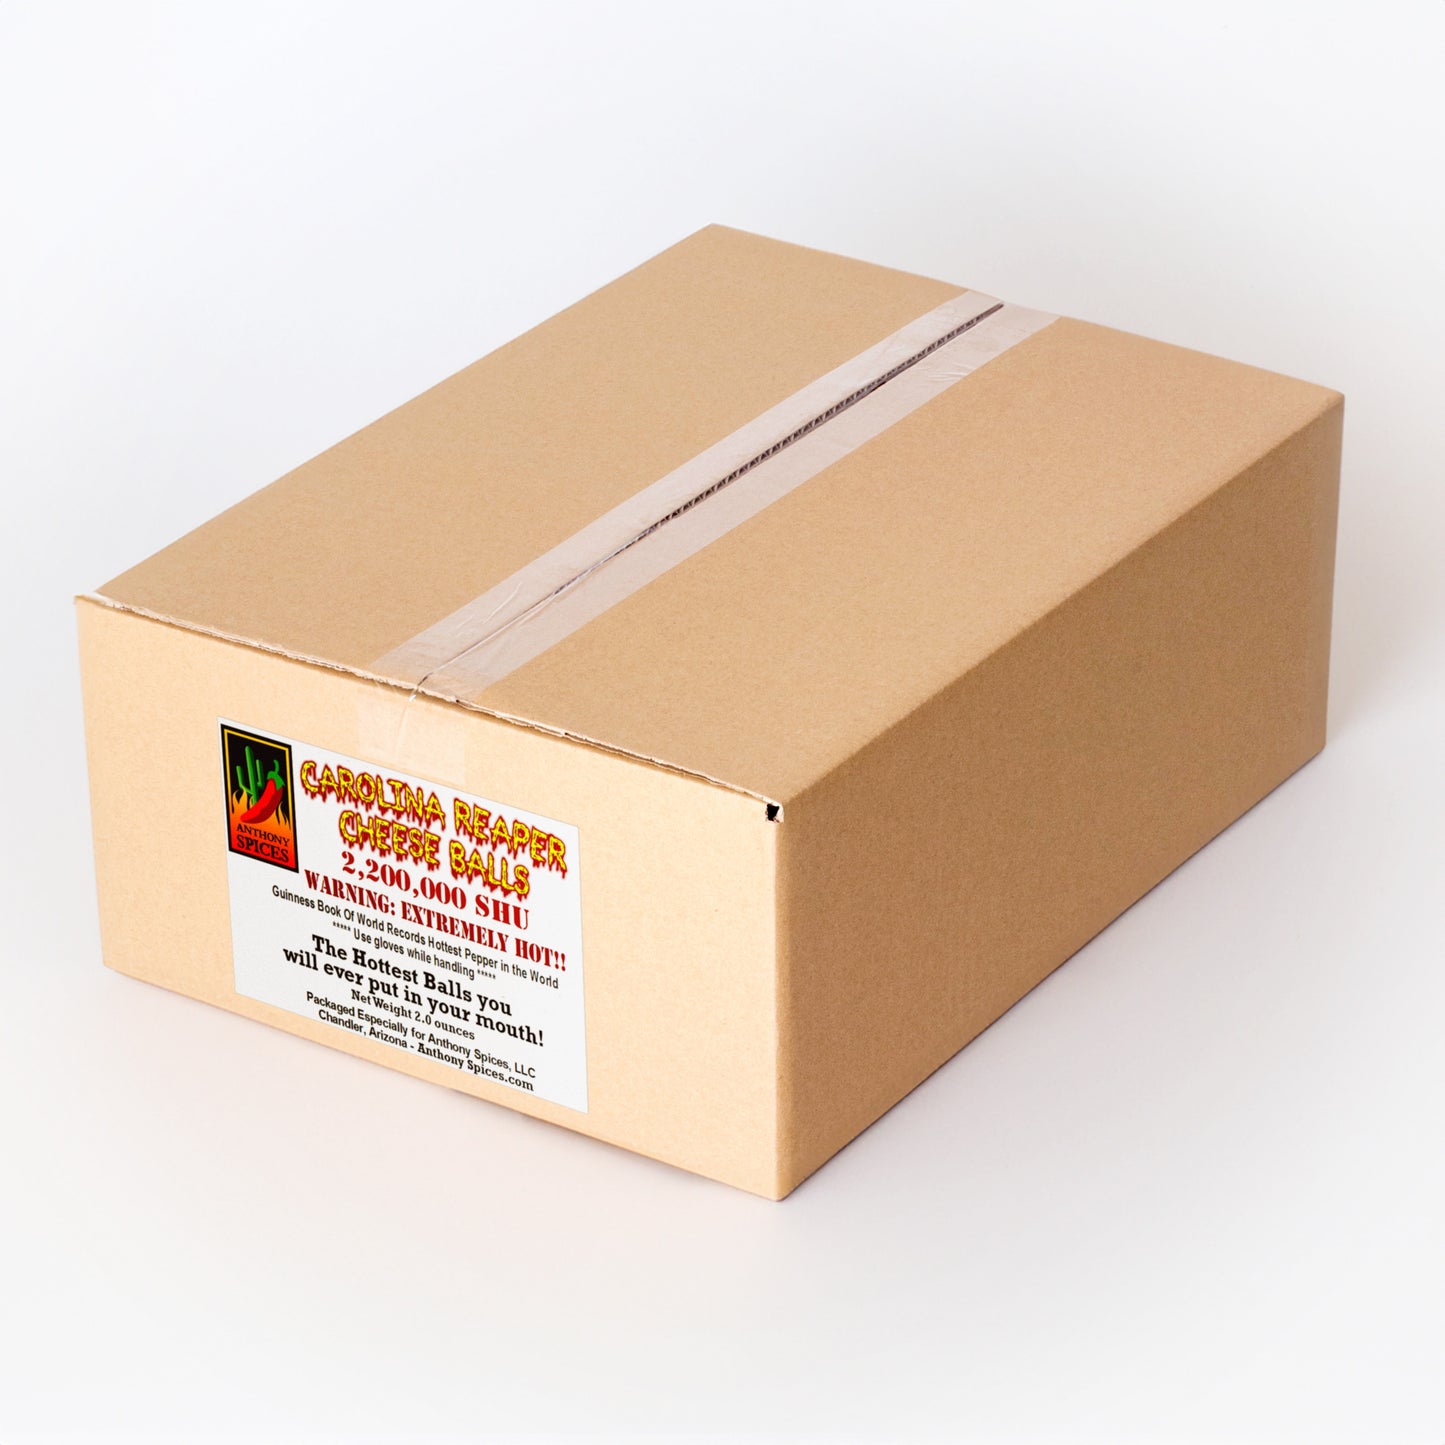 Case of 12 (2oz Bags) of Carolina Reaper Cheese Balls - Closed shipping box with label